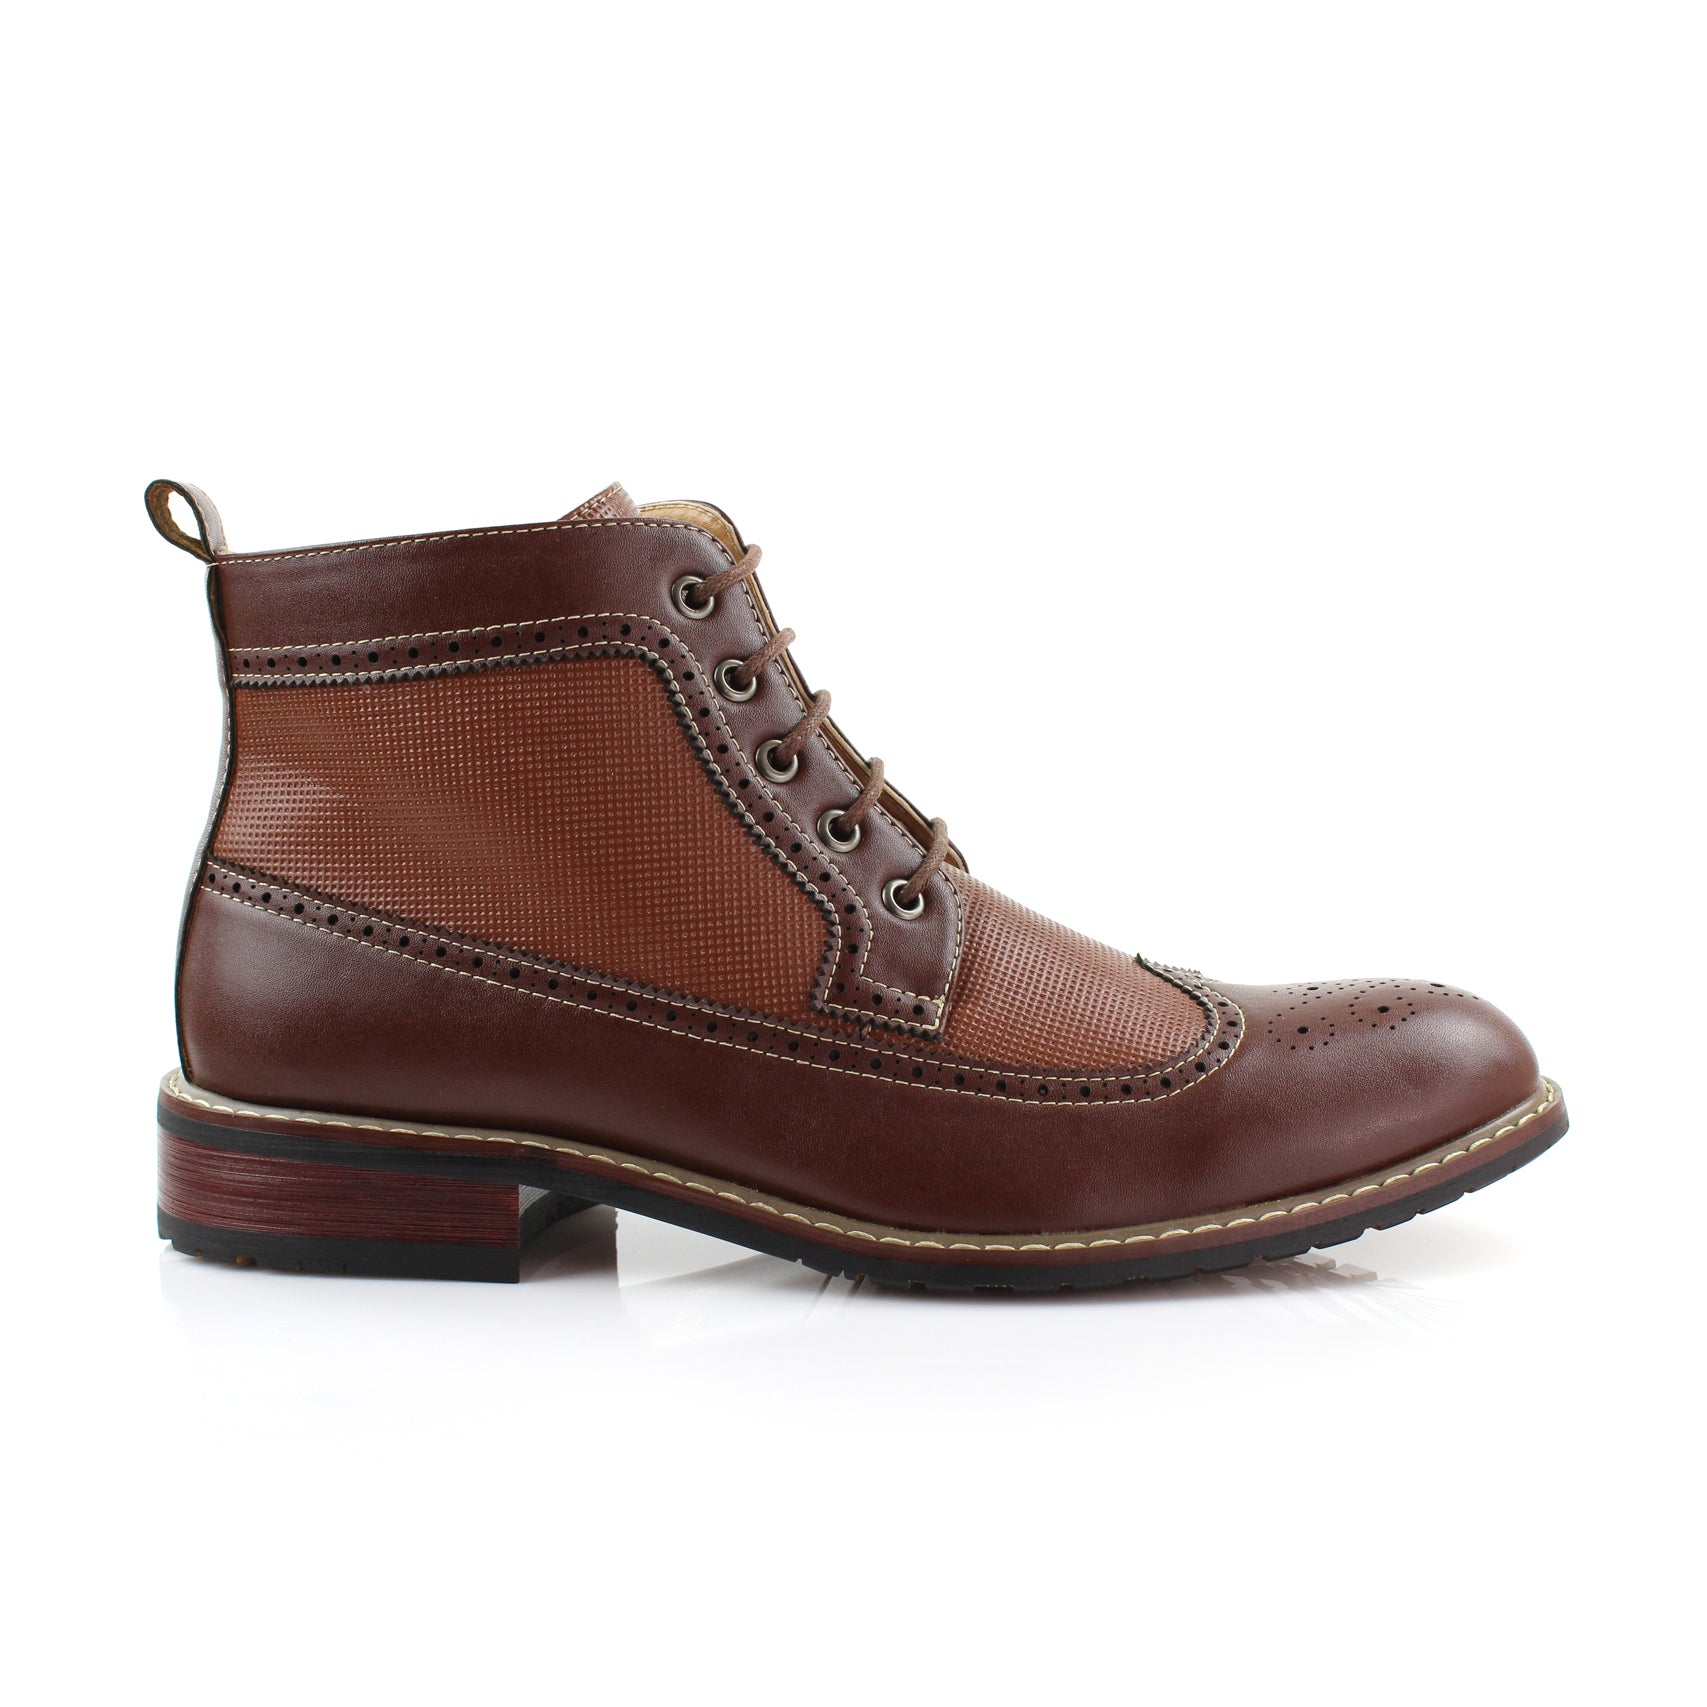 Two-Toned Brogue Wingtip Boots | Michael by Ferro Aldo | Conal Footwear | Outer Side Angle View